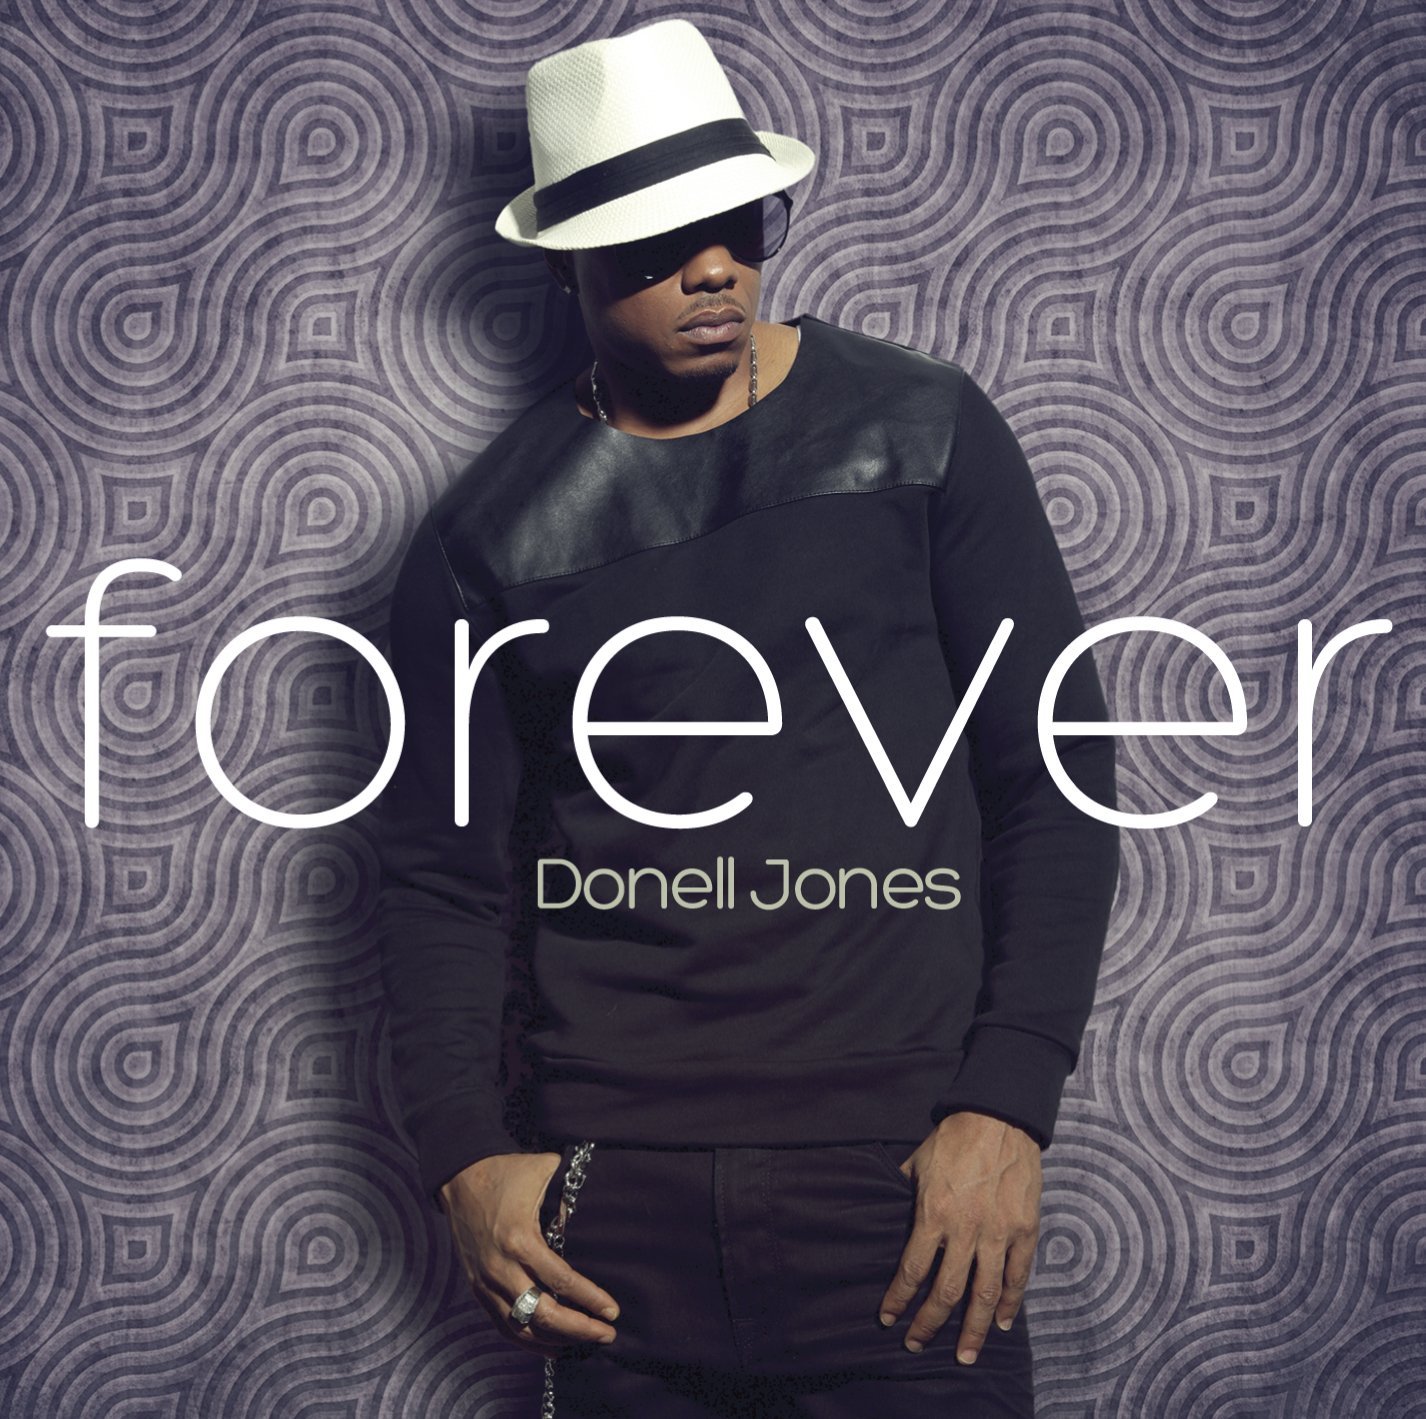 Donell Foreve